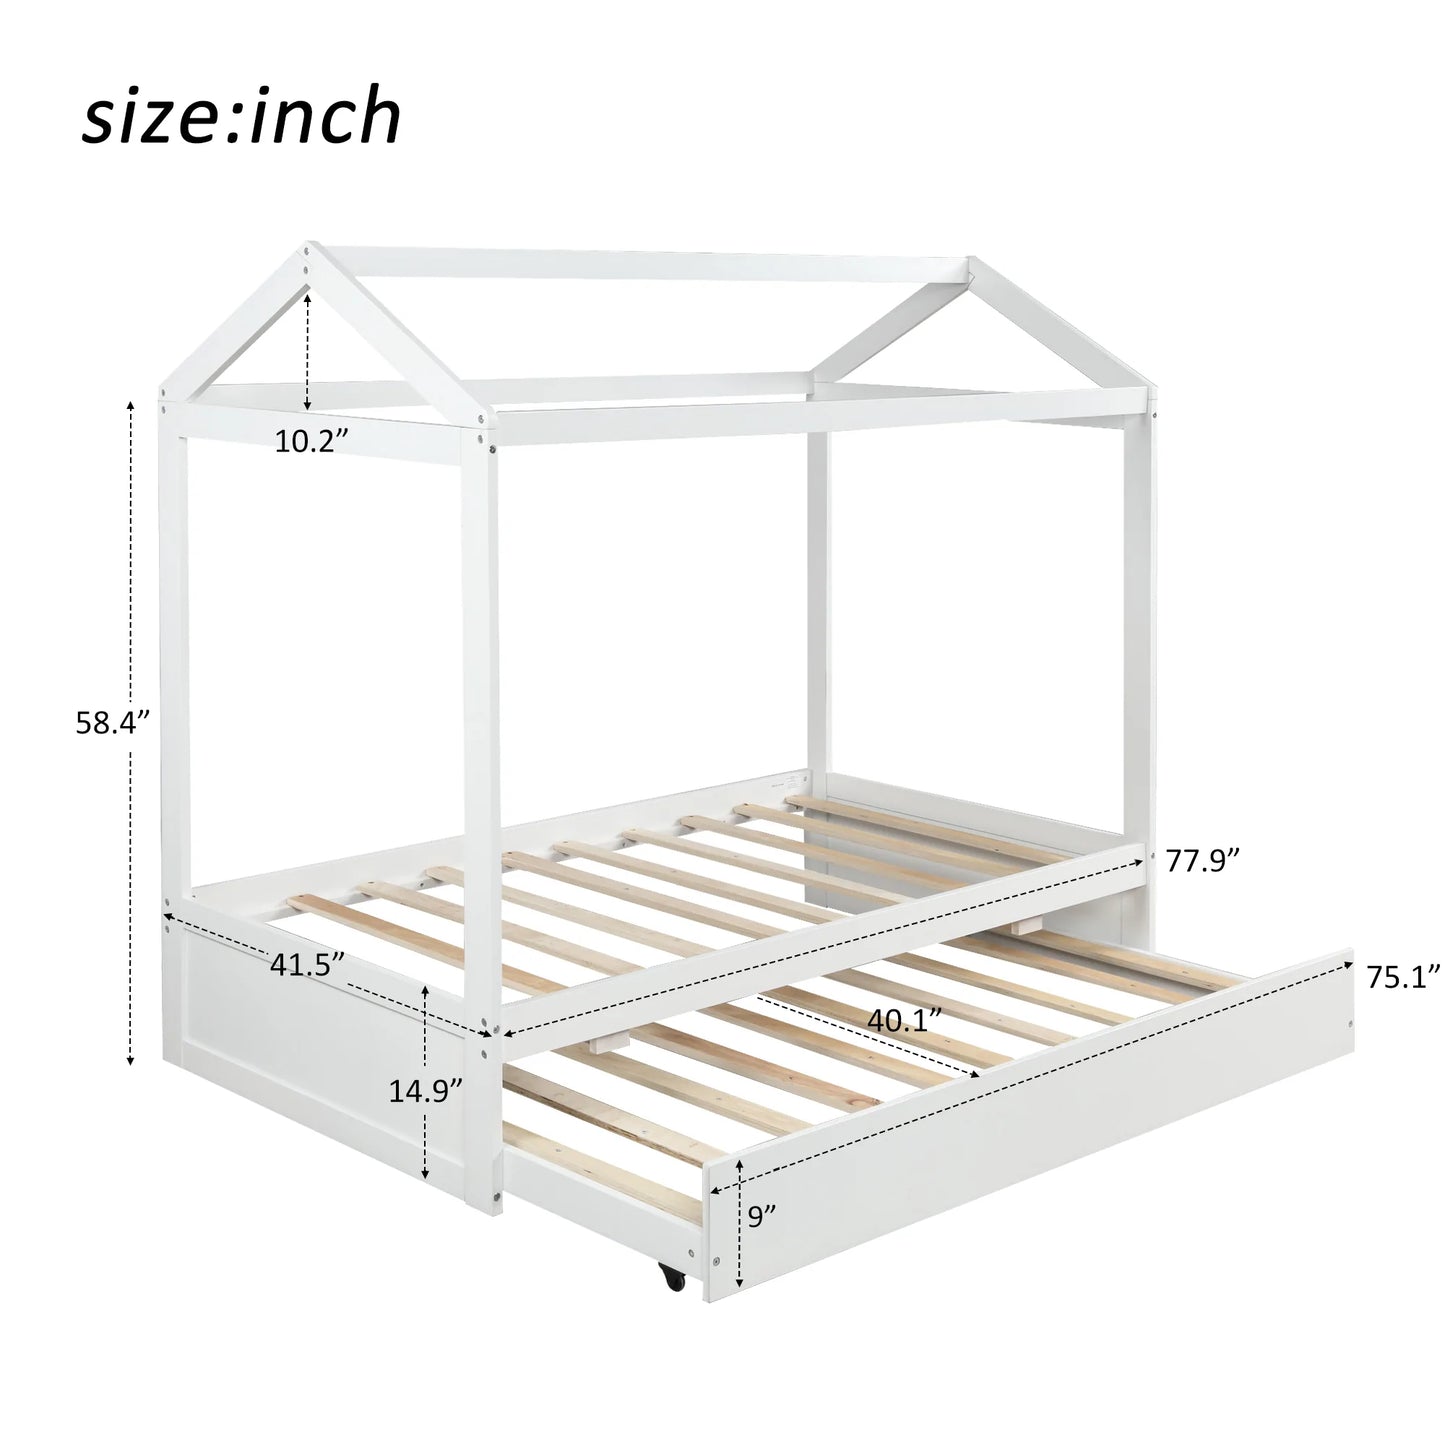 House Bed with Trundle in White